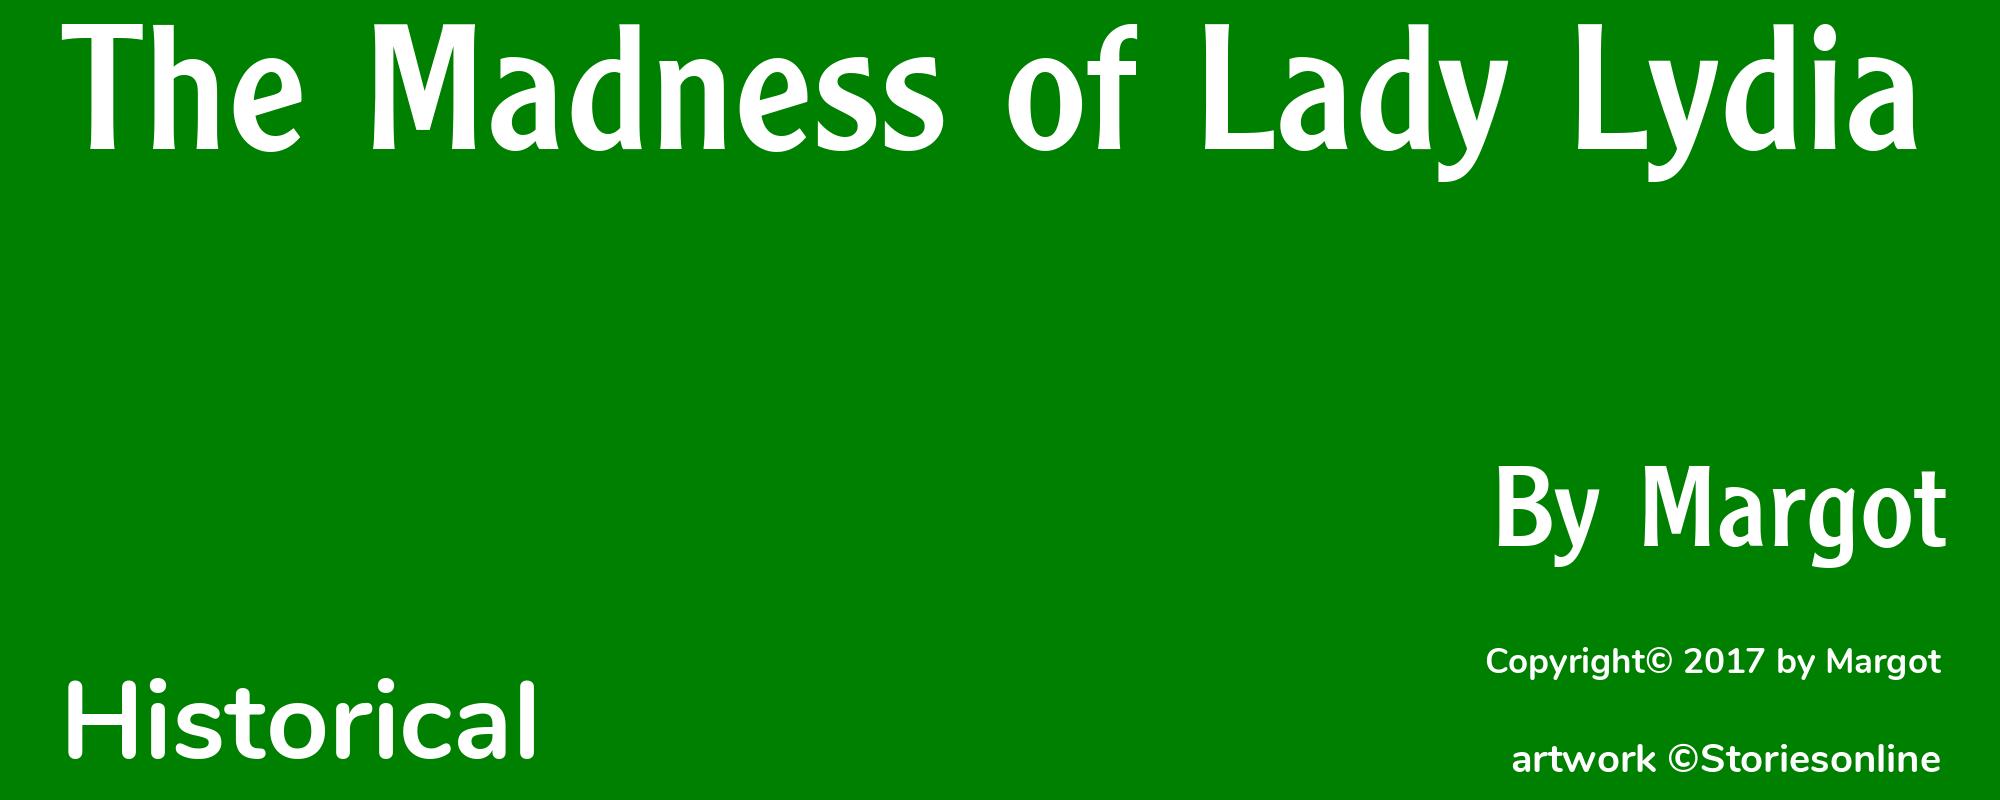 The Madness of Lady Lydia - Cover